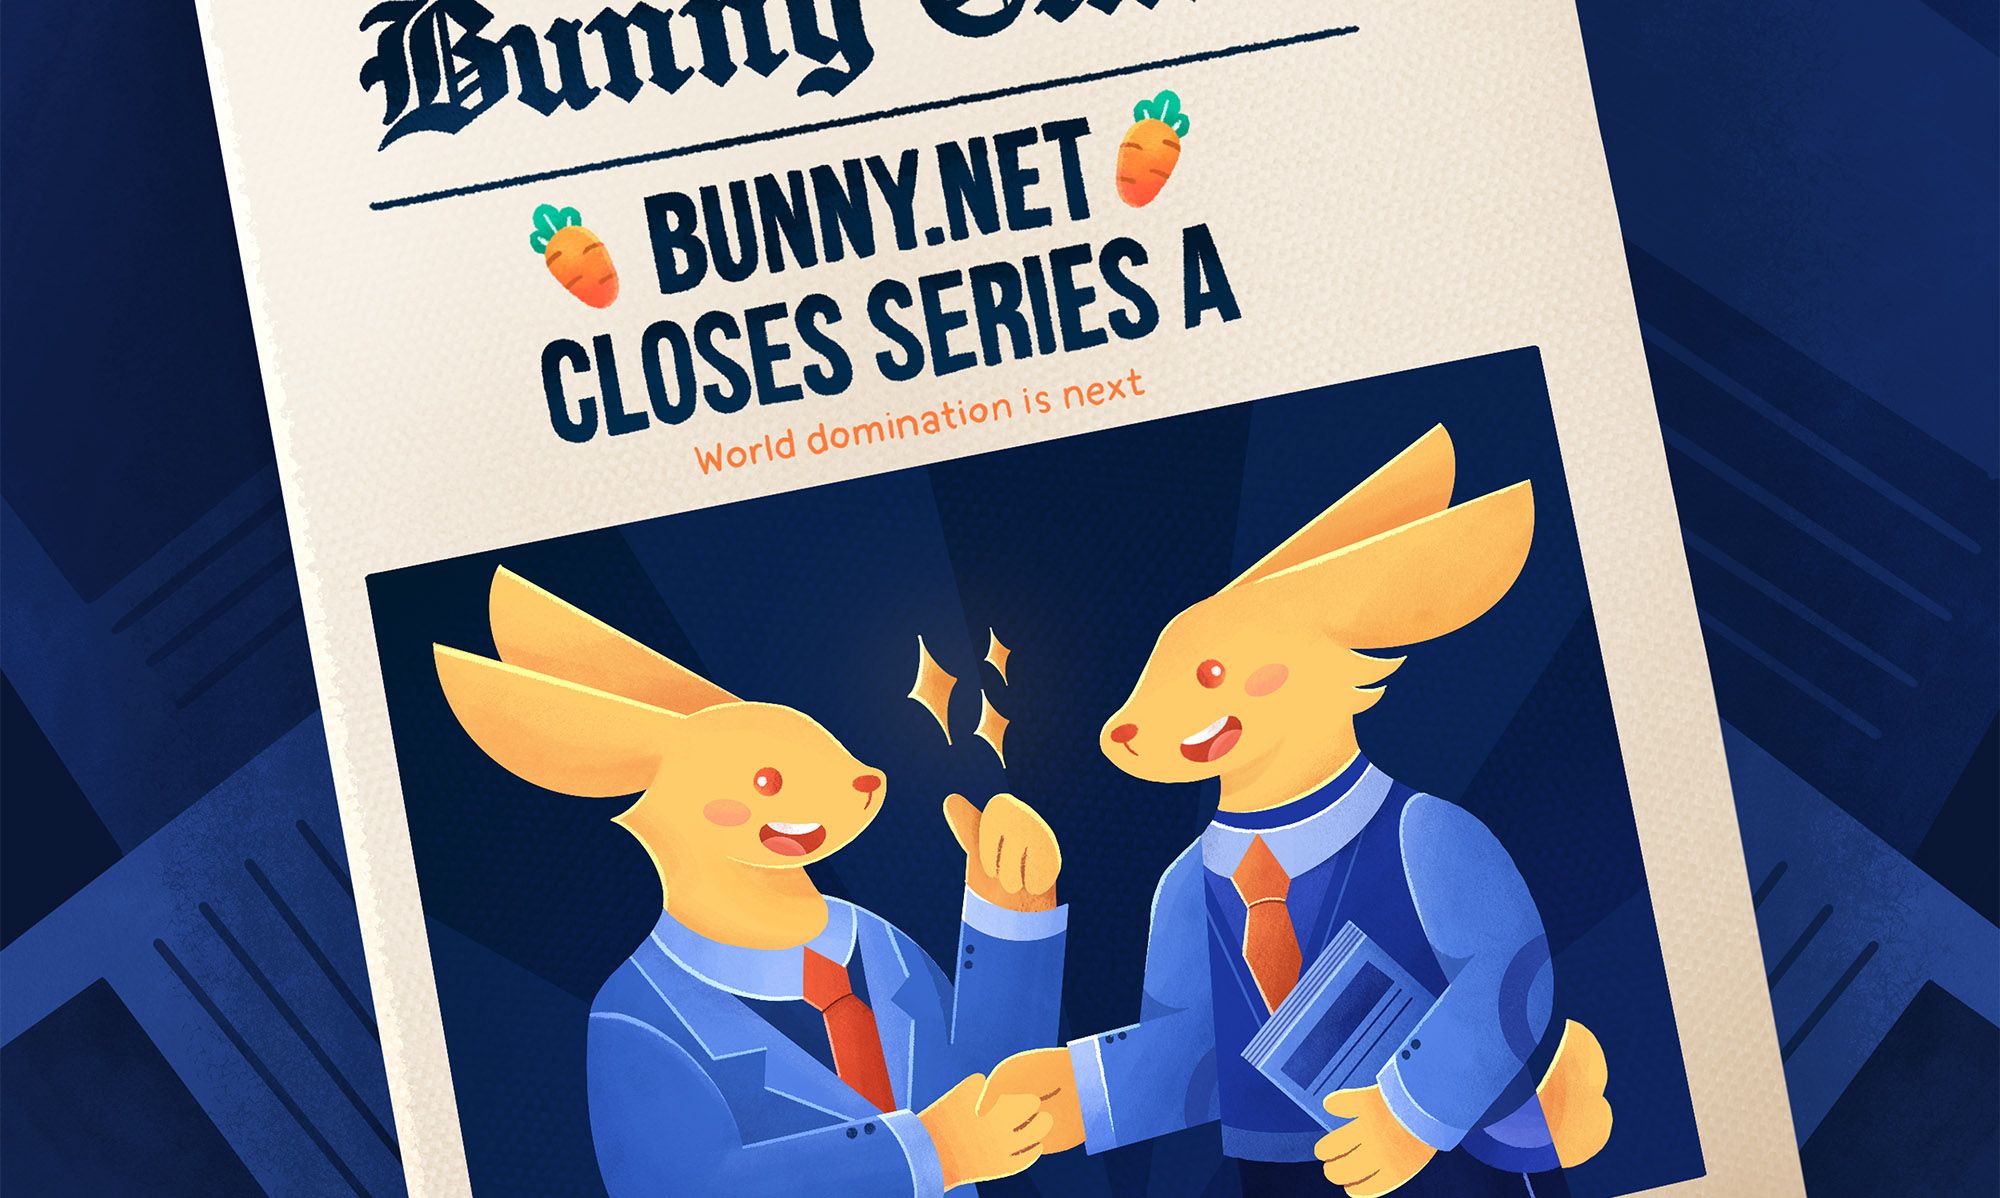 Series A Announcement - We're taking bunny.net to the next level!